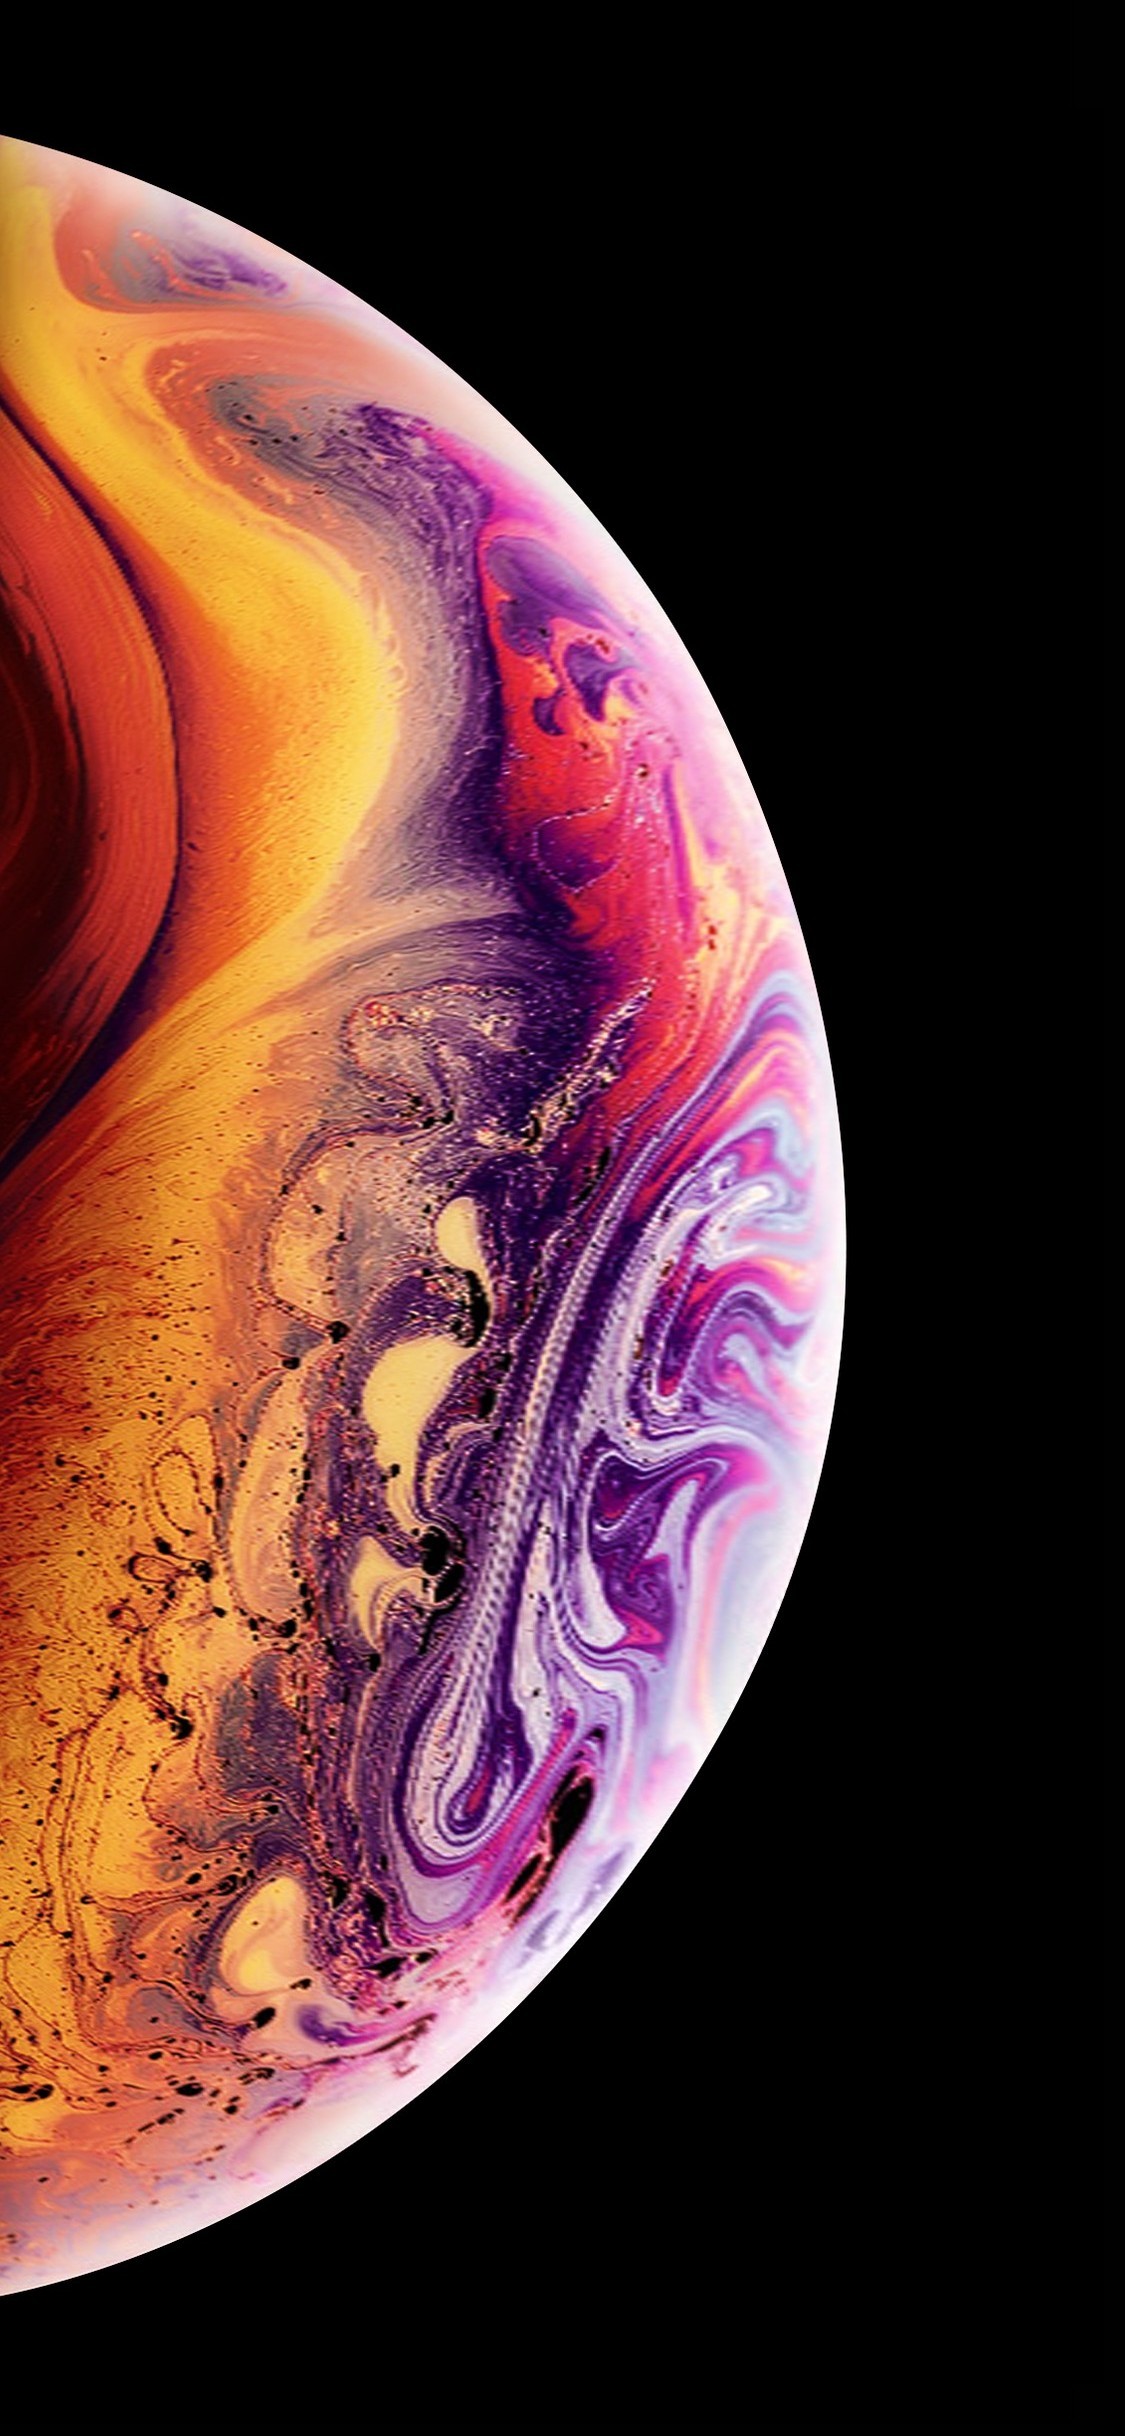 iPhone XS Wallpaper New With high-resolution 1125X2436 pixel. Download all Mobile Wallpapers and Use them as wallpapers for your iPhone, Tablet, iPad, Android and other mobile devices